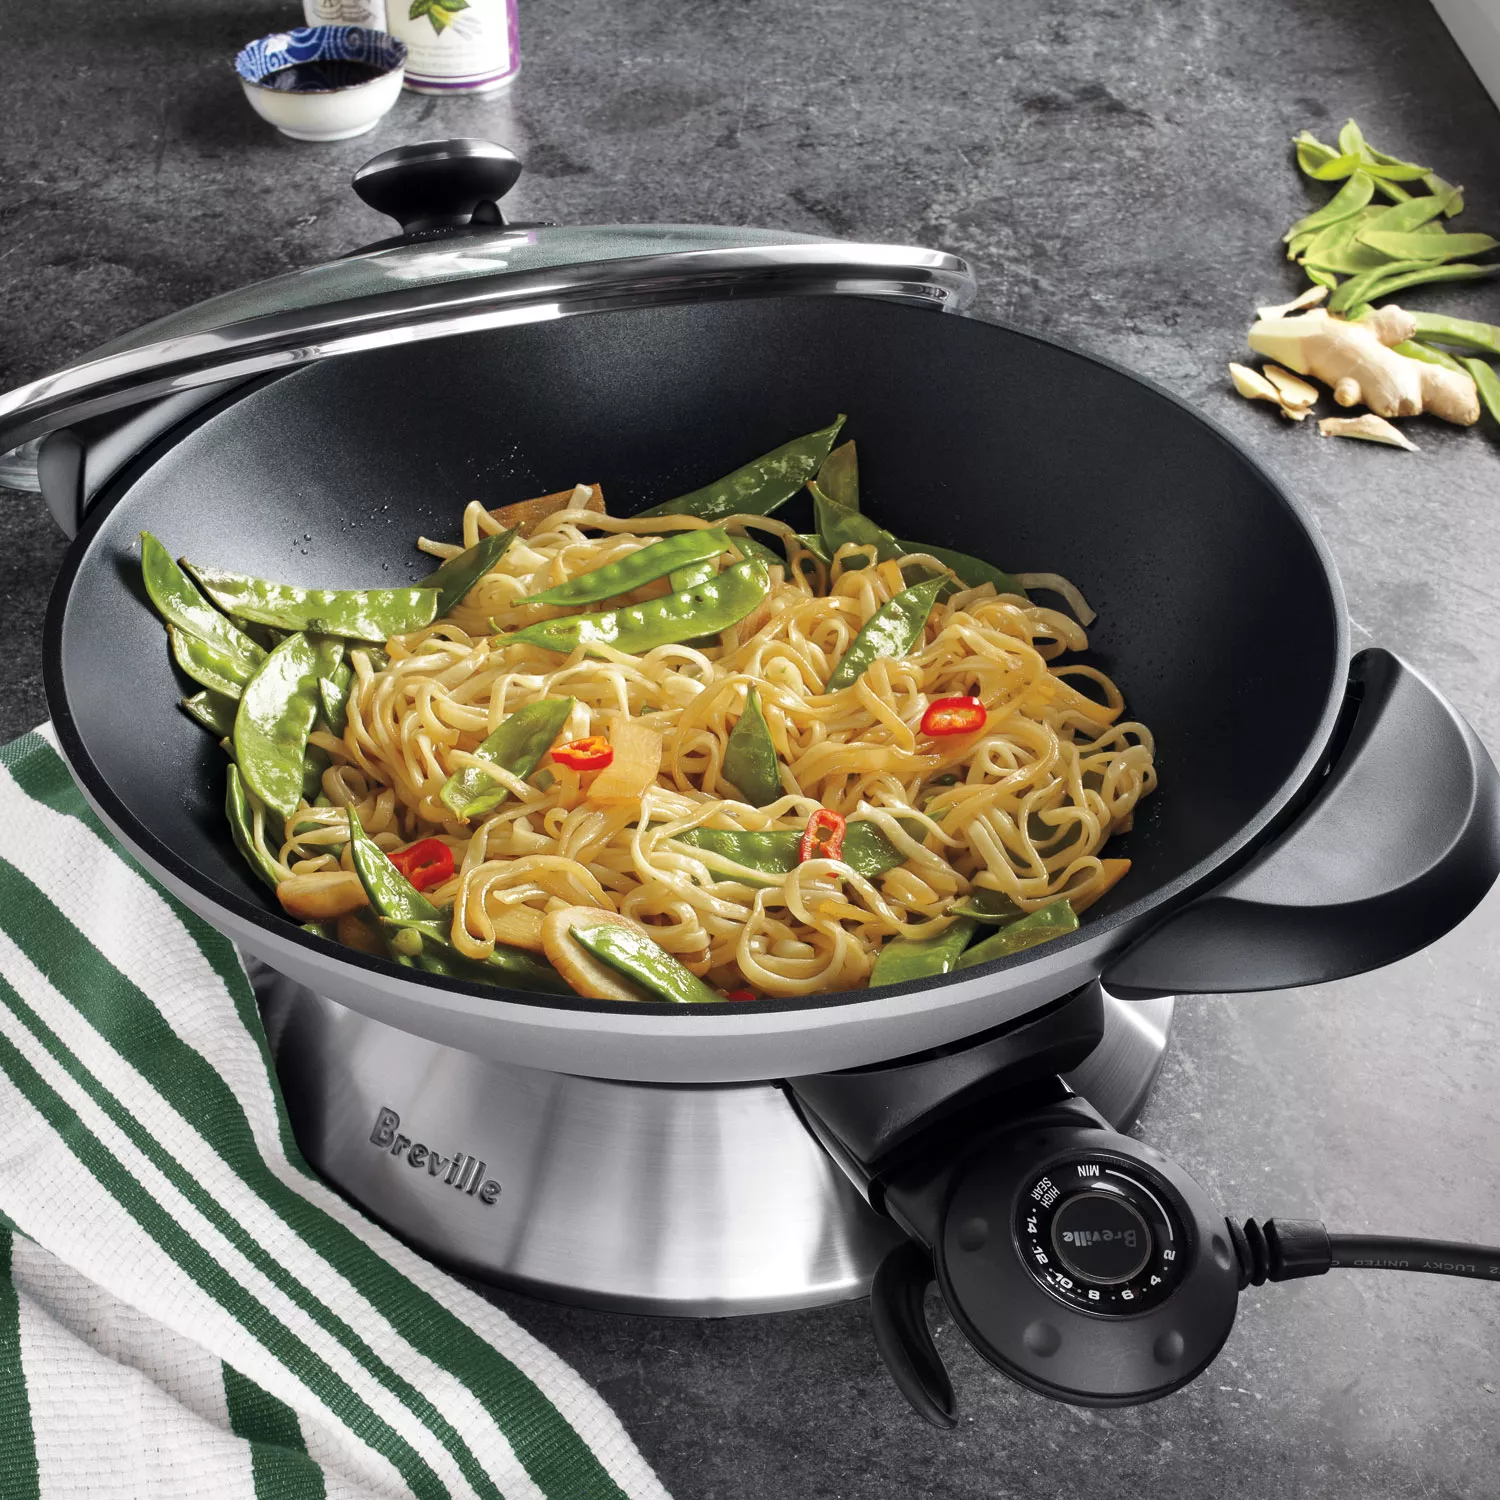 Hot Wok Pro - Large Stainless Steel Electric Wok